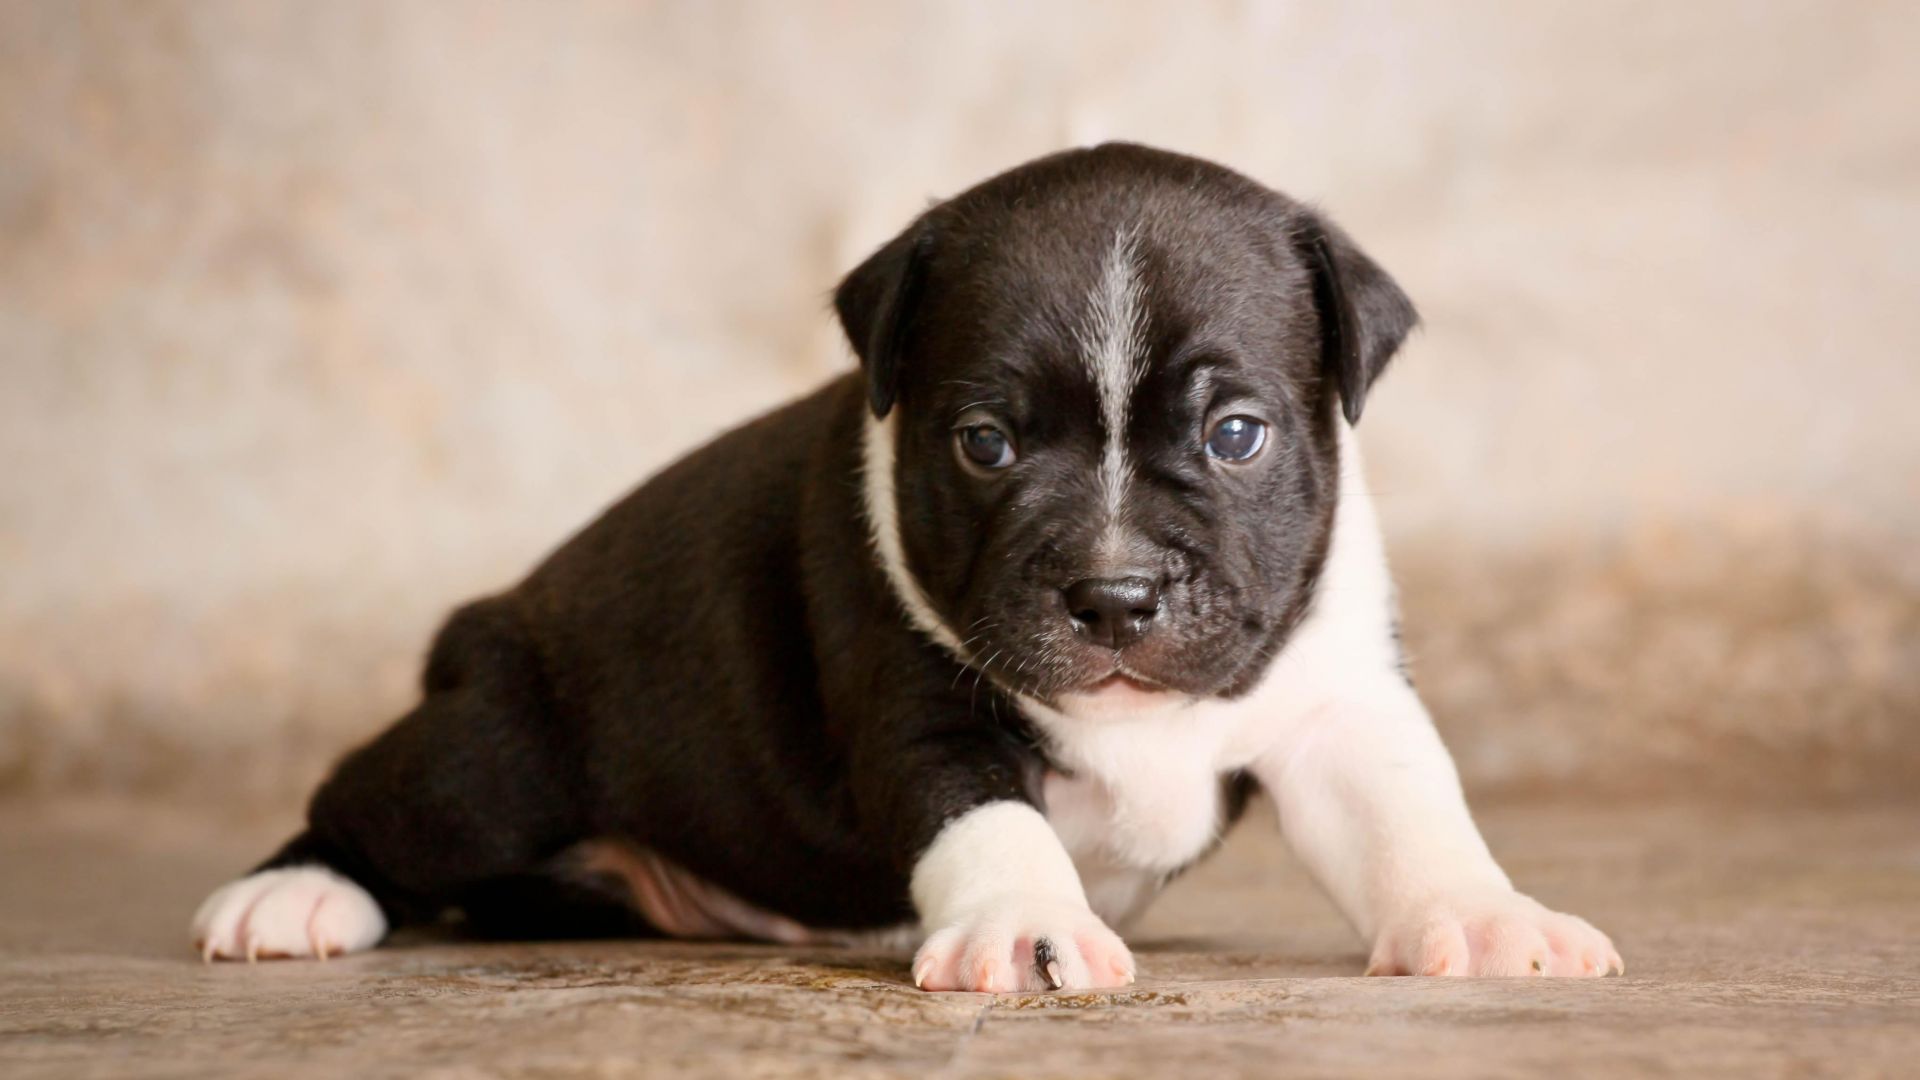 Wallpaper Staffordshire bull terrier puppy, dog, cute baby